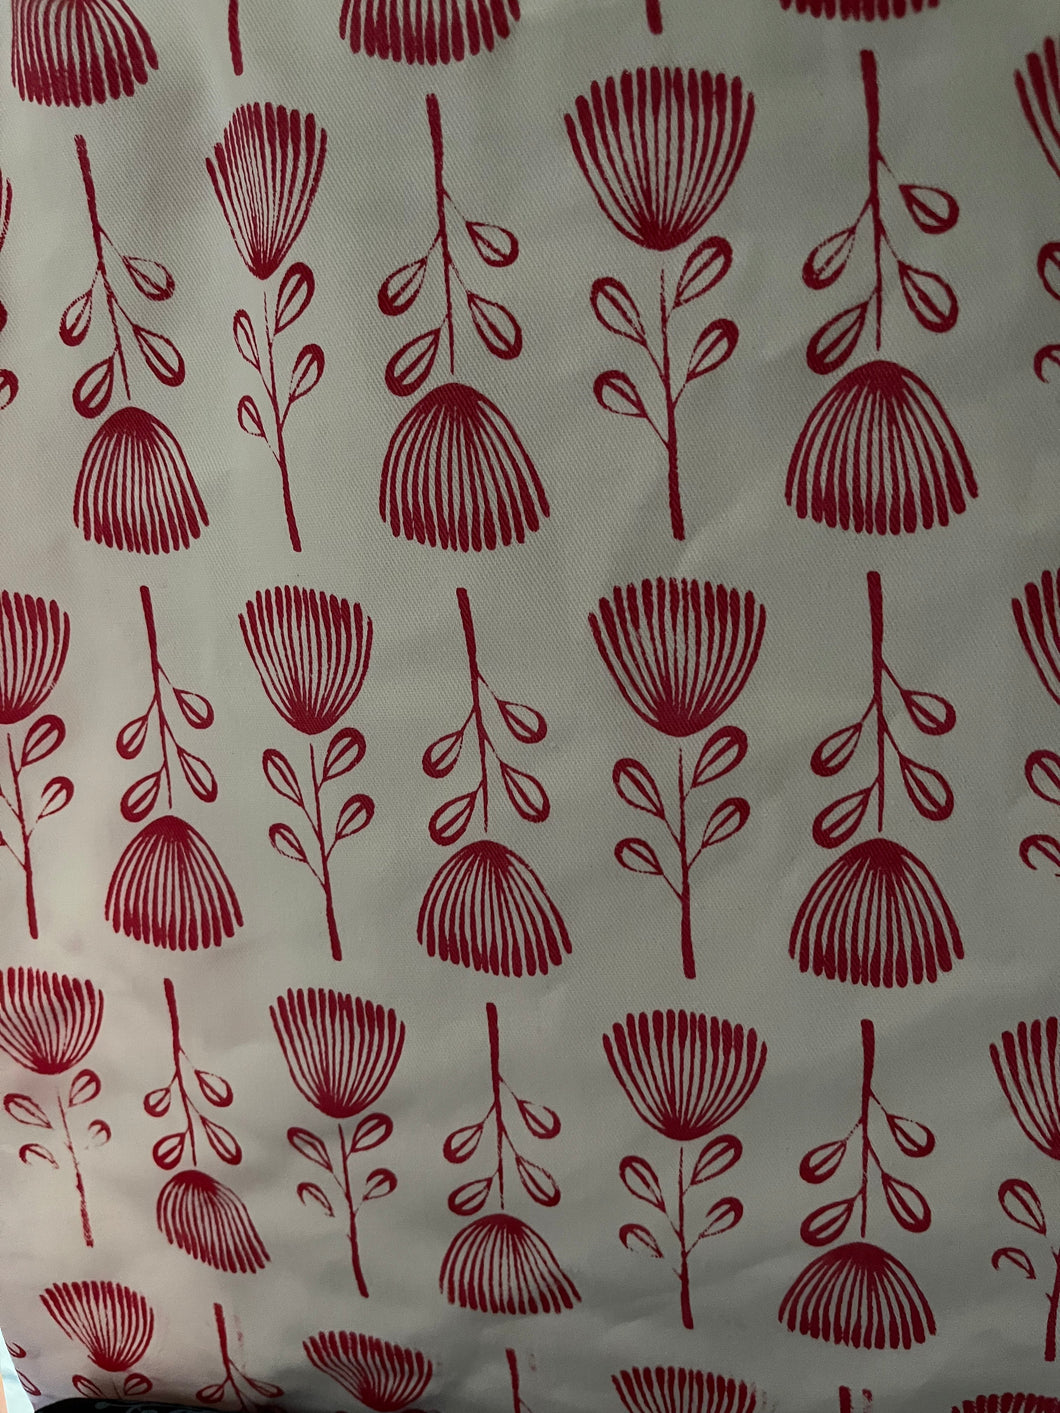 3m Stowe & So Table Cloth. Pin Cushion Protea in Red on White.